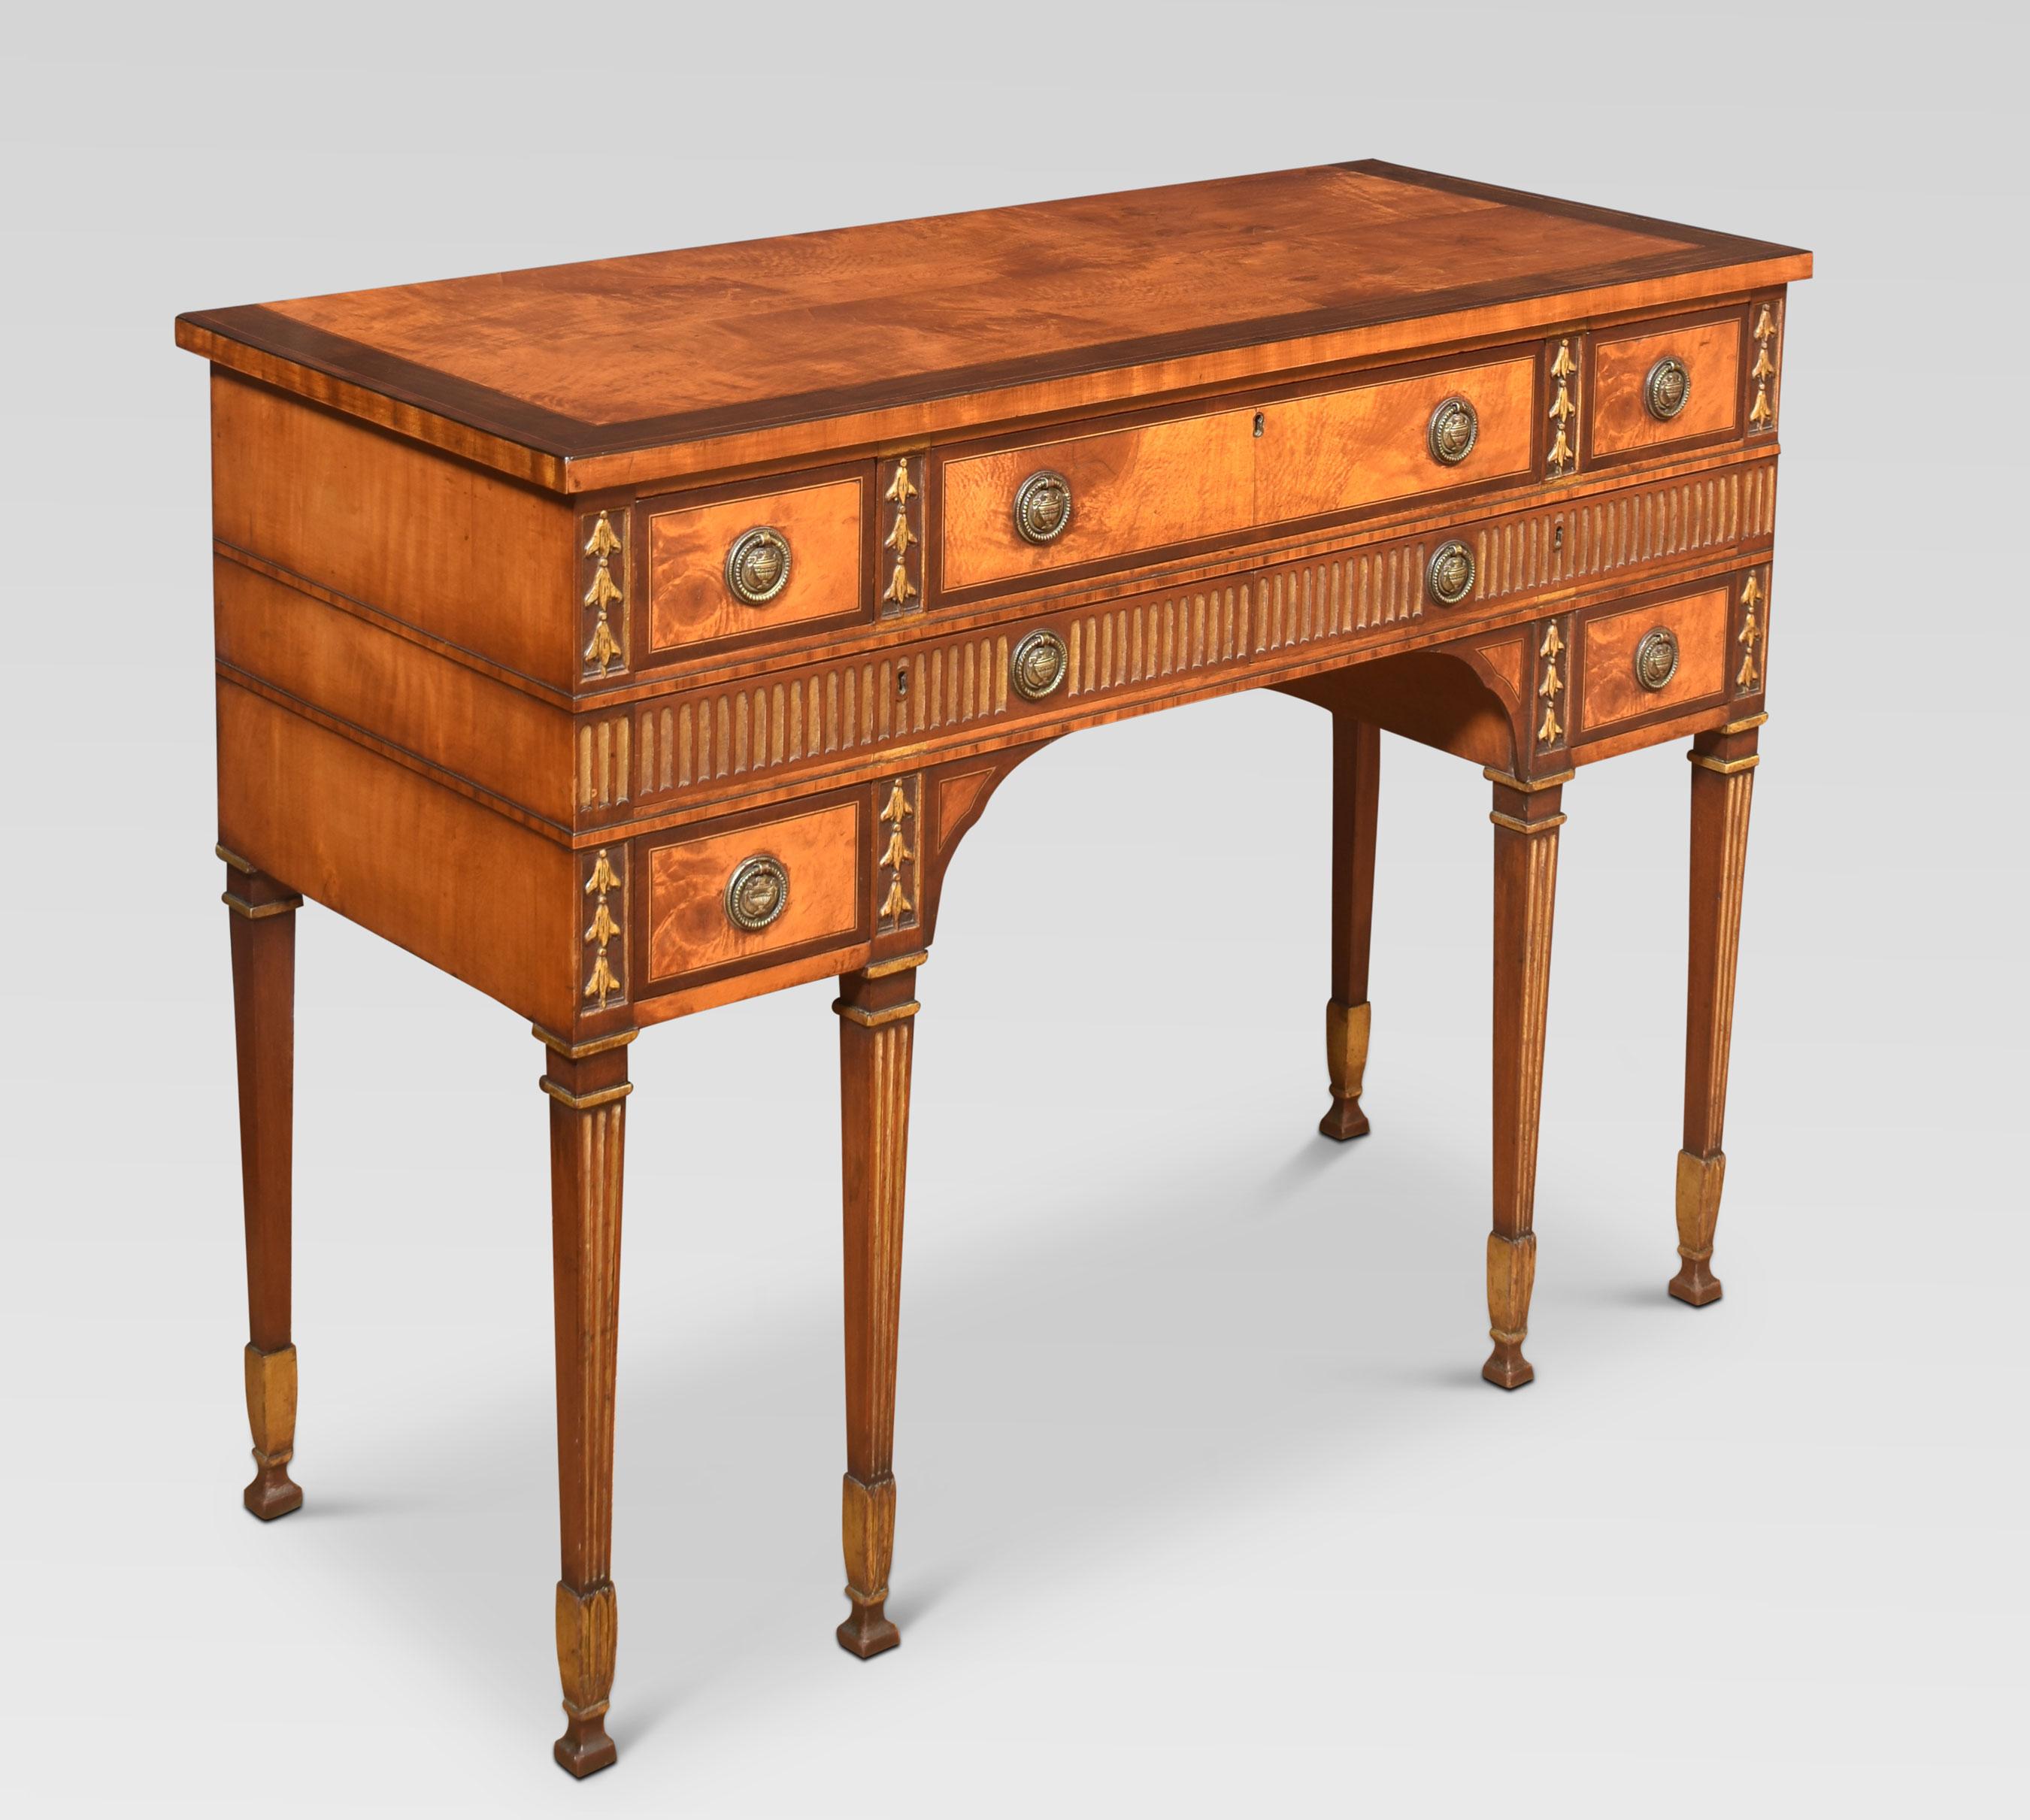 Inlaid Georgian style sideboard, the well-figured top with a cross banded edge, to the freeze fitted with an arrangement of drawers with brass circular handles and gilded carved bellflower decoration. All raised up on reeded square tapering